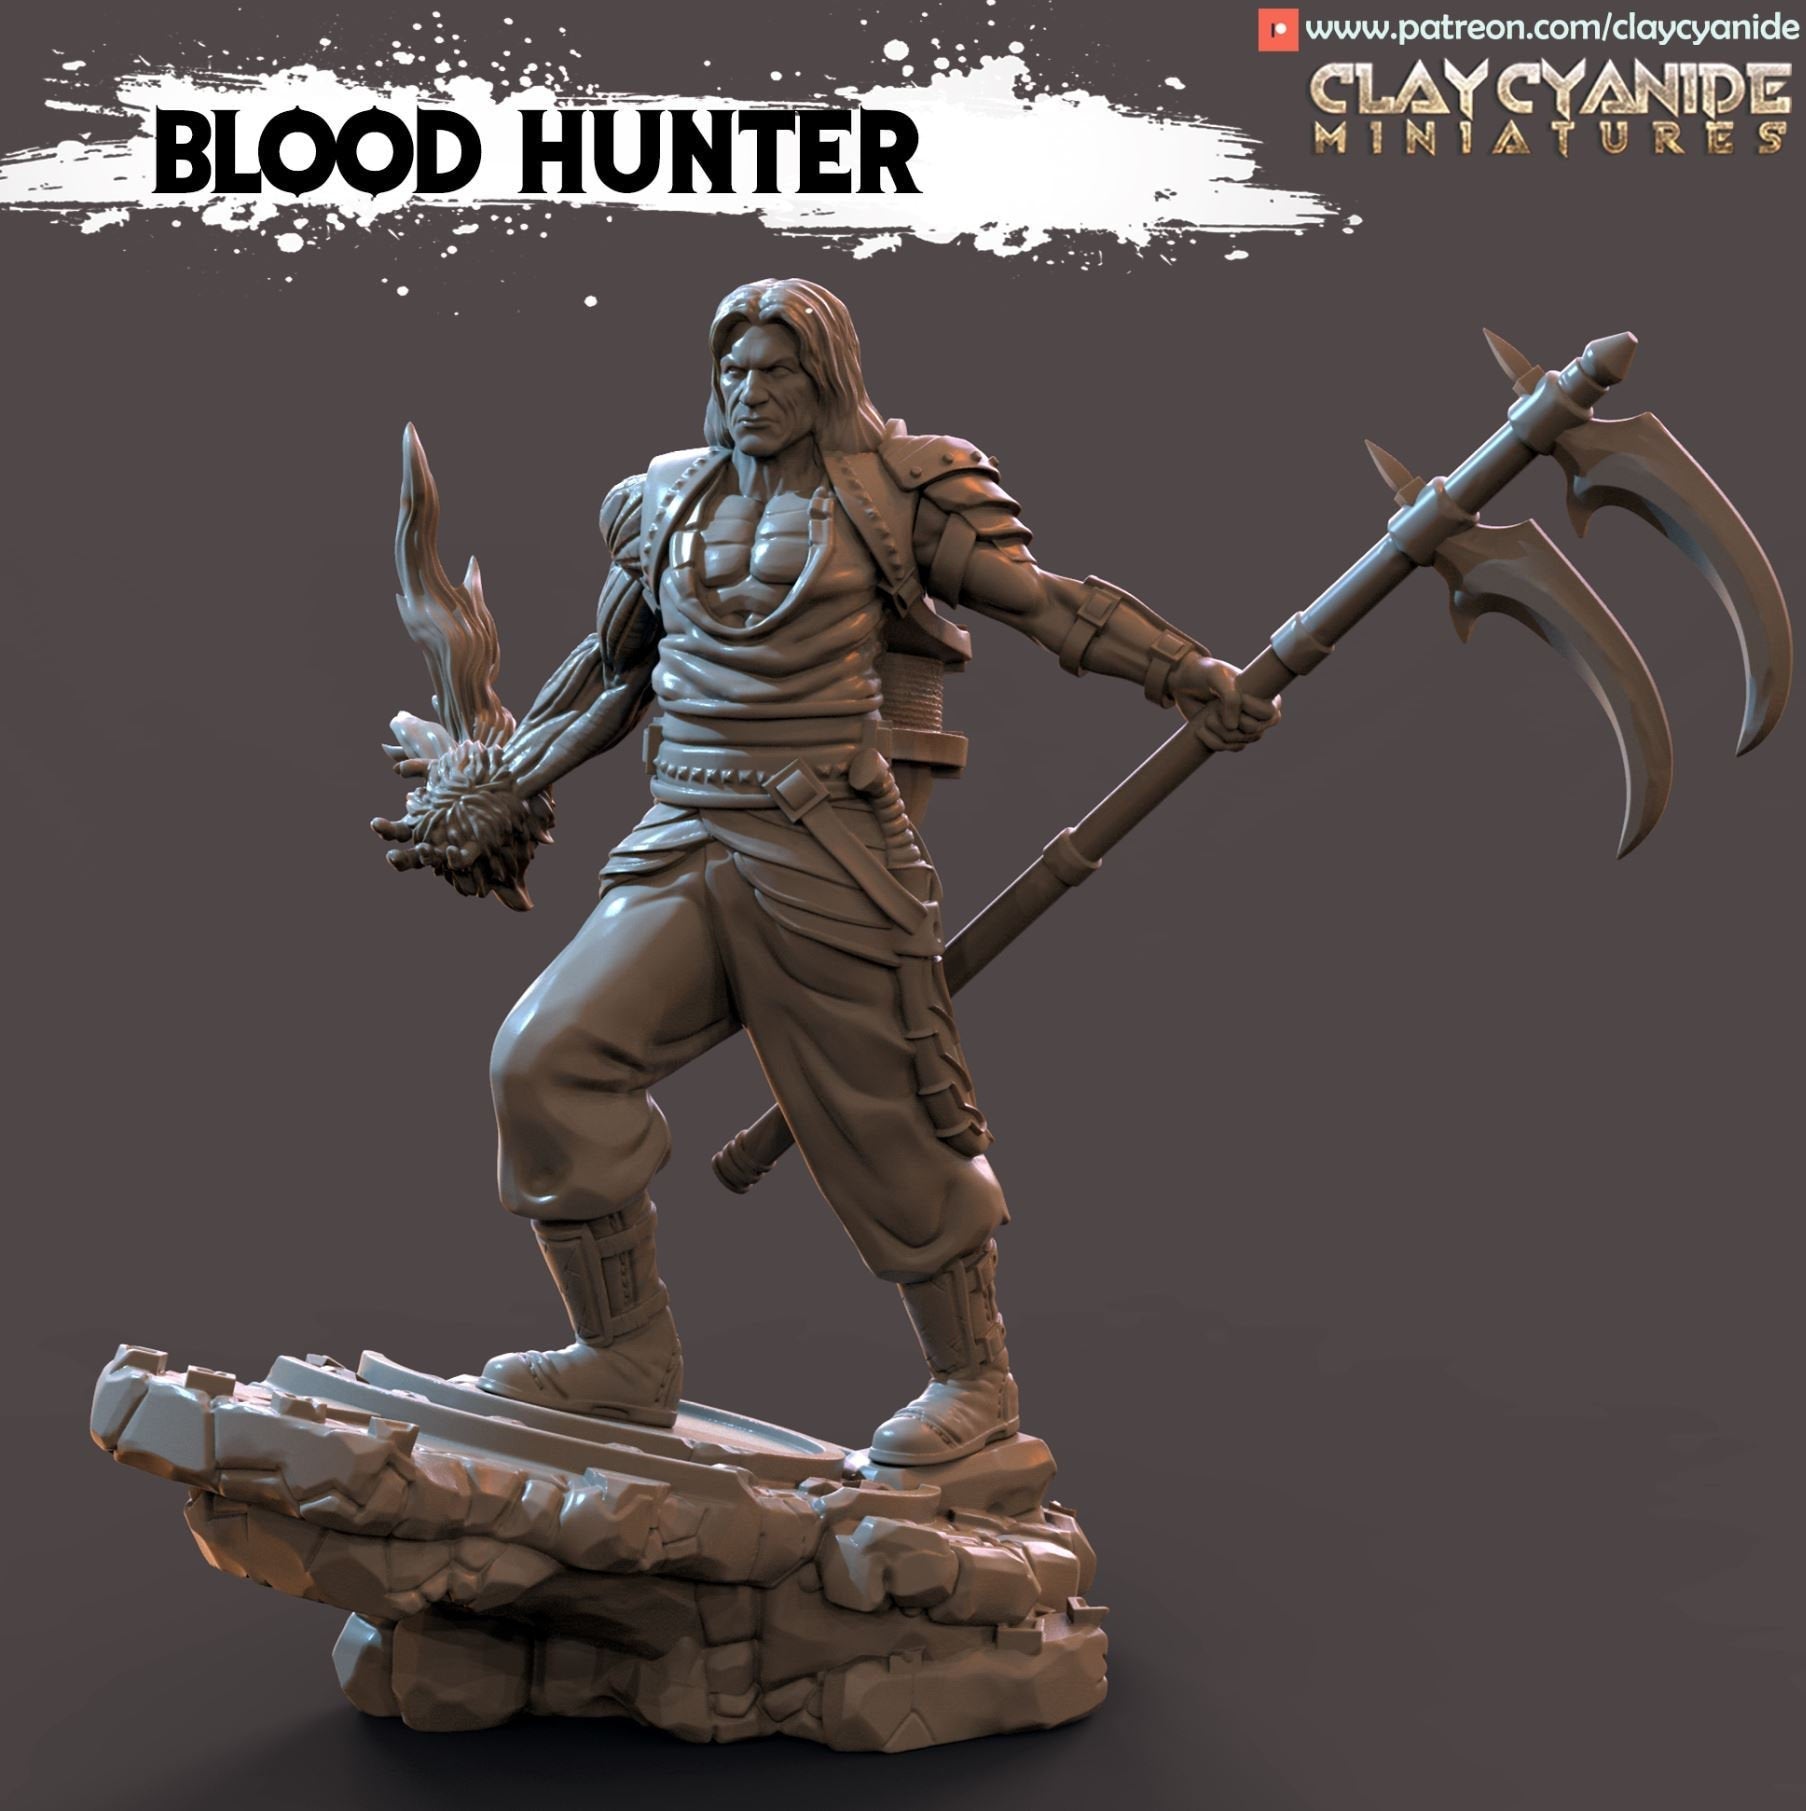 Blood Hunter from Clay Cyanide Miniatures. This piece is very much a Premium Print!